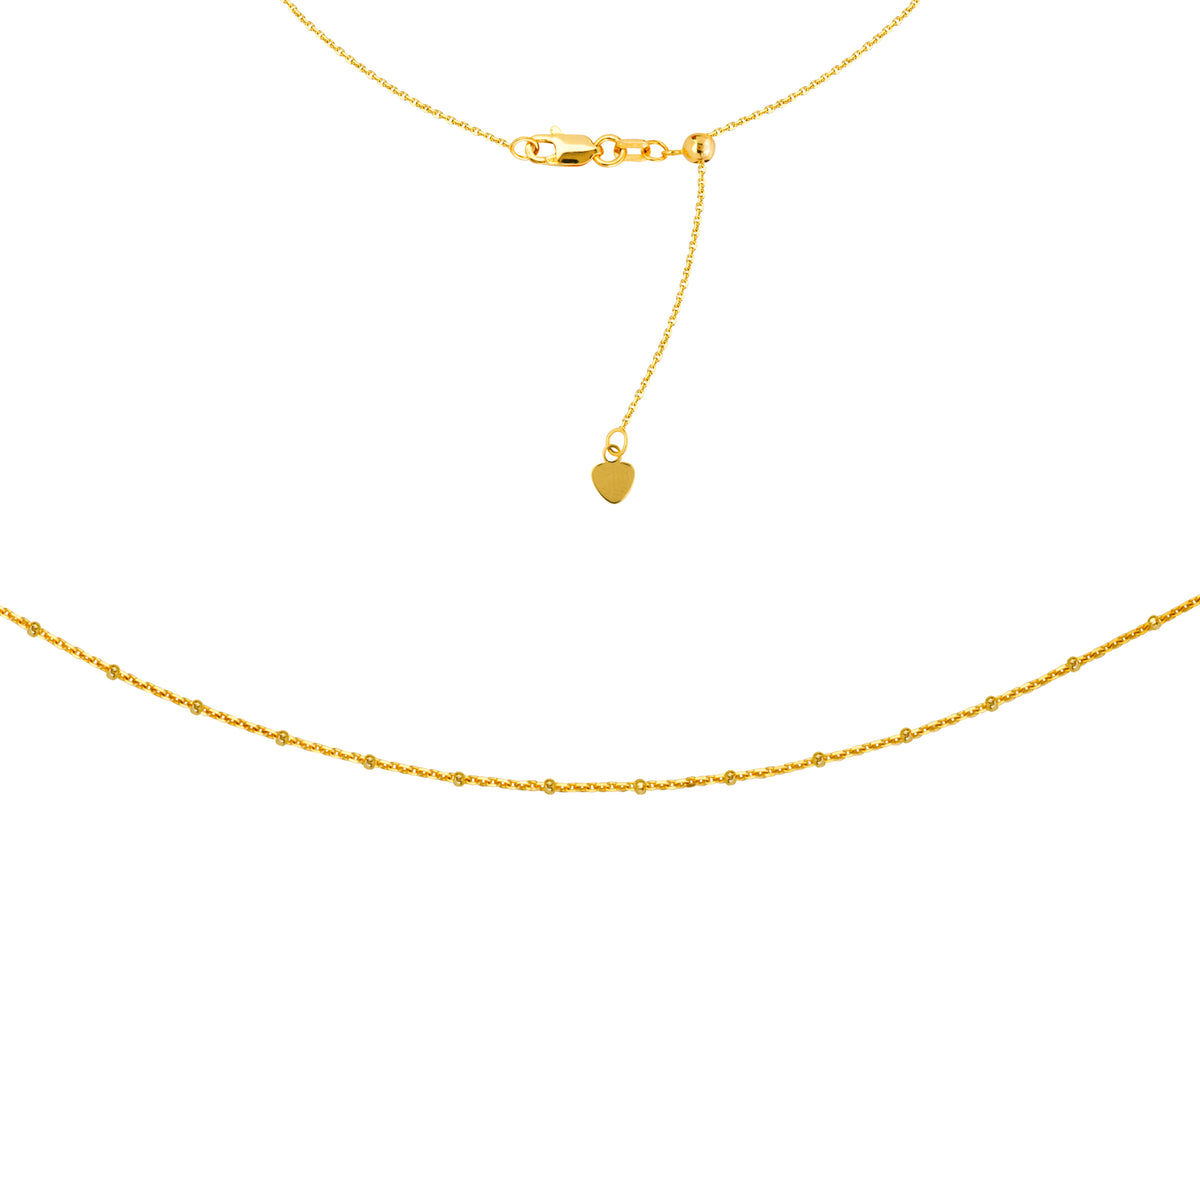 Saturn Chain Choker 14k Yellow Gold Necklace, 16" Adjustable